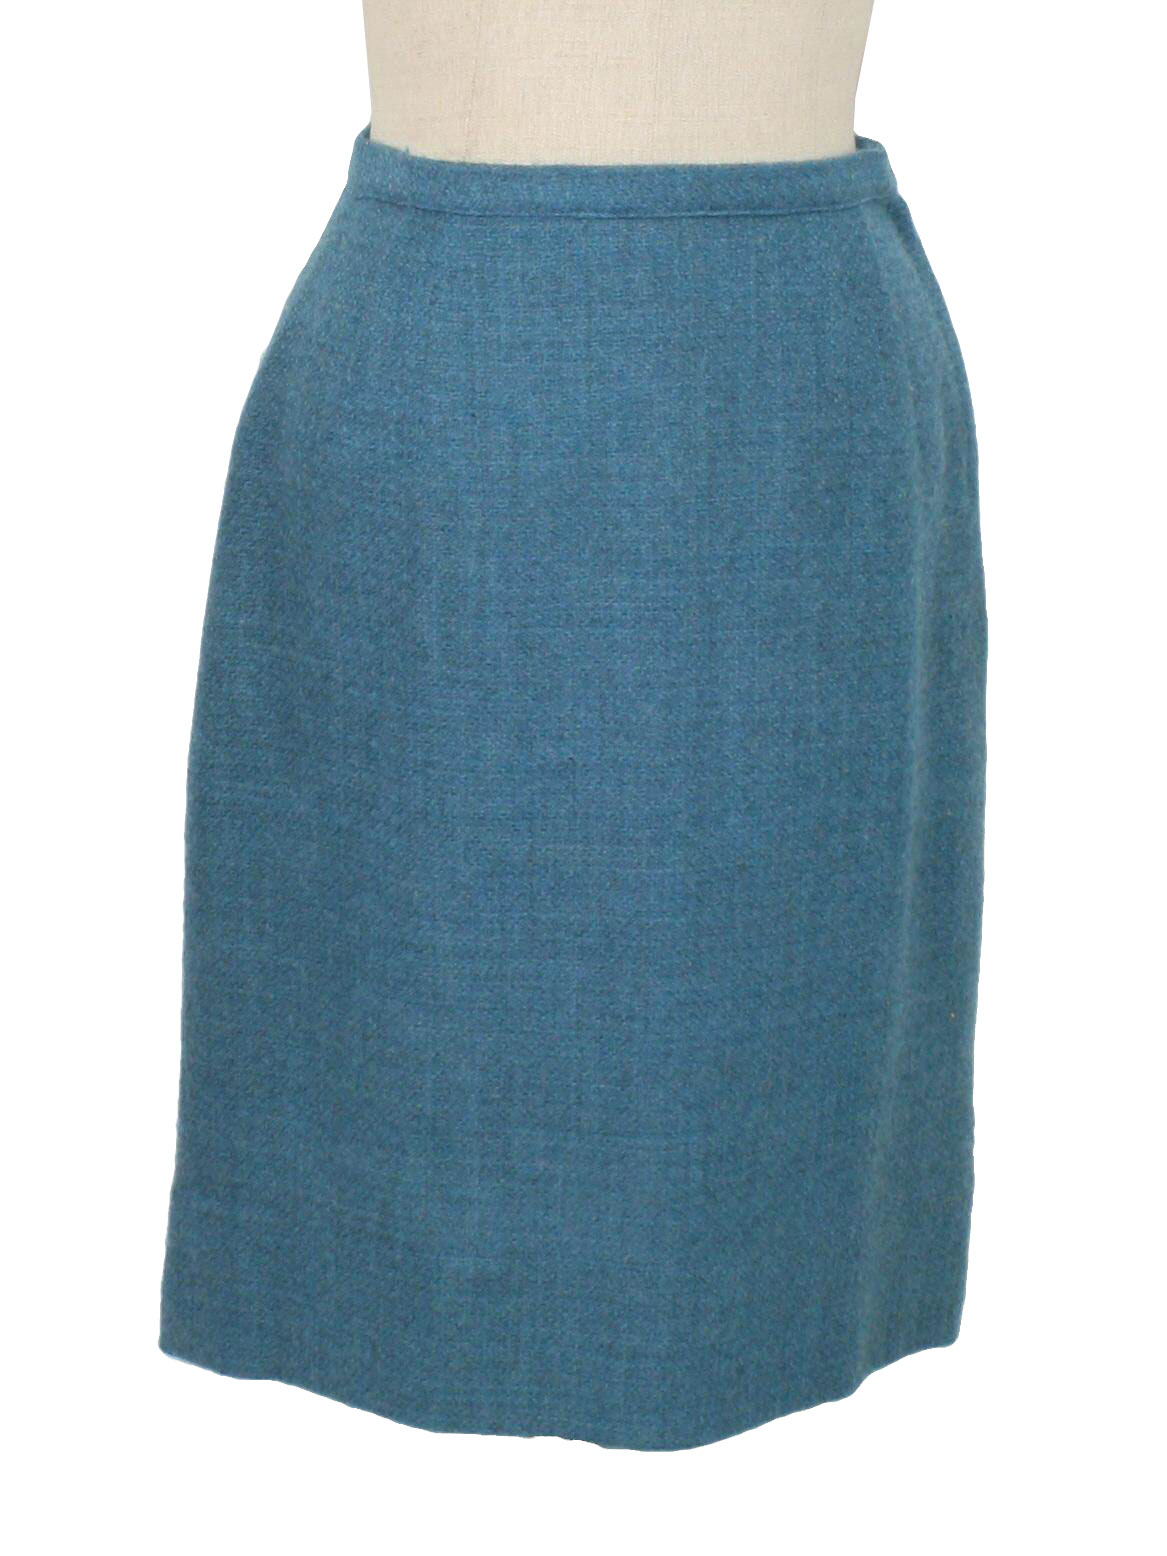 1960's Vintage Home Sewn Wool Skirt: 60s -Home Sewn- Womens teal, wool ...